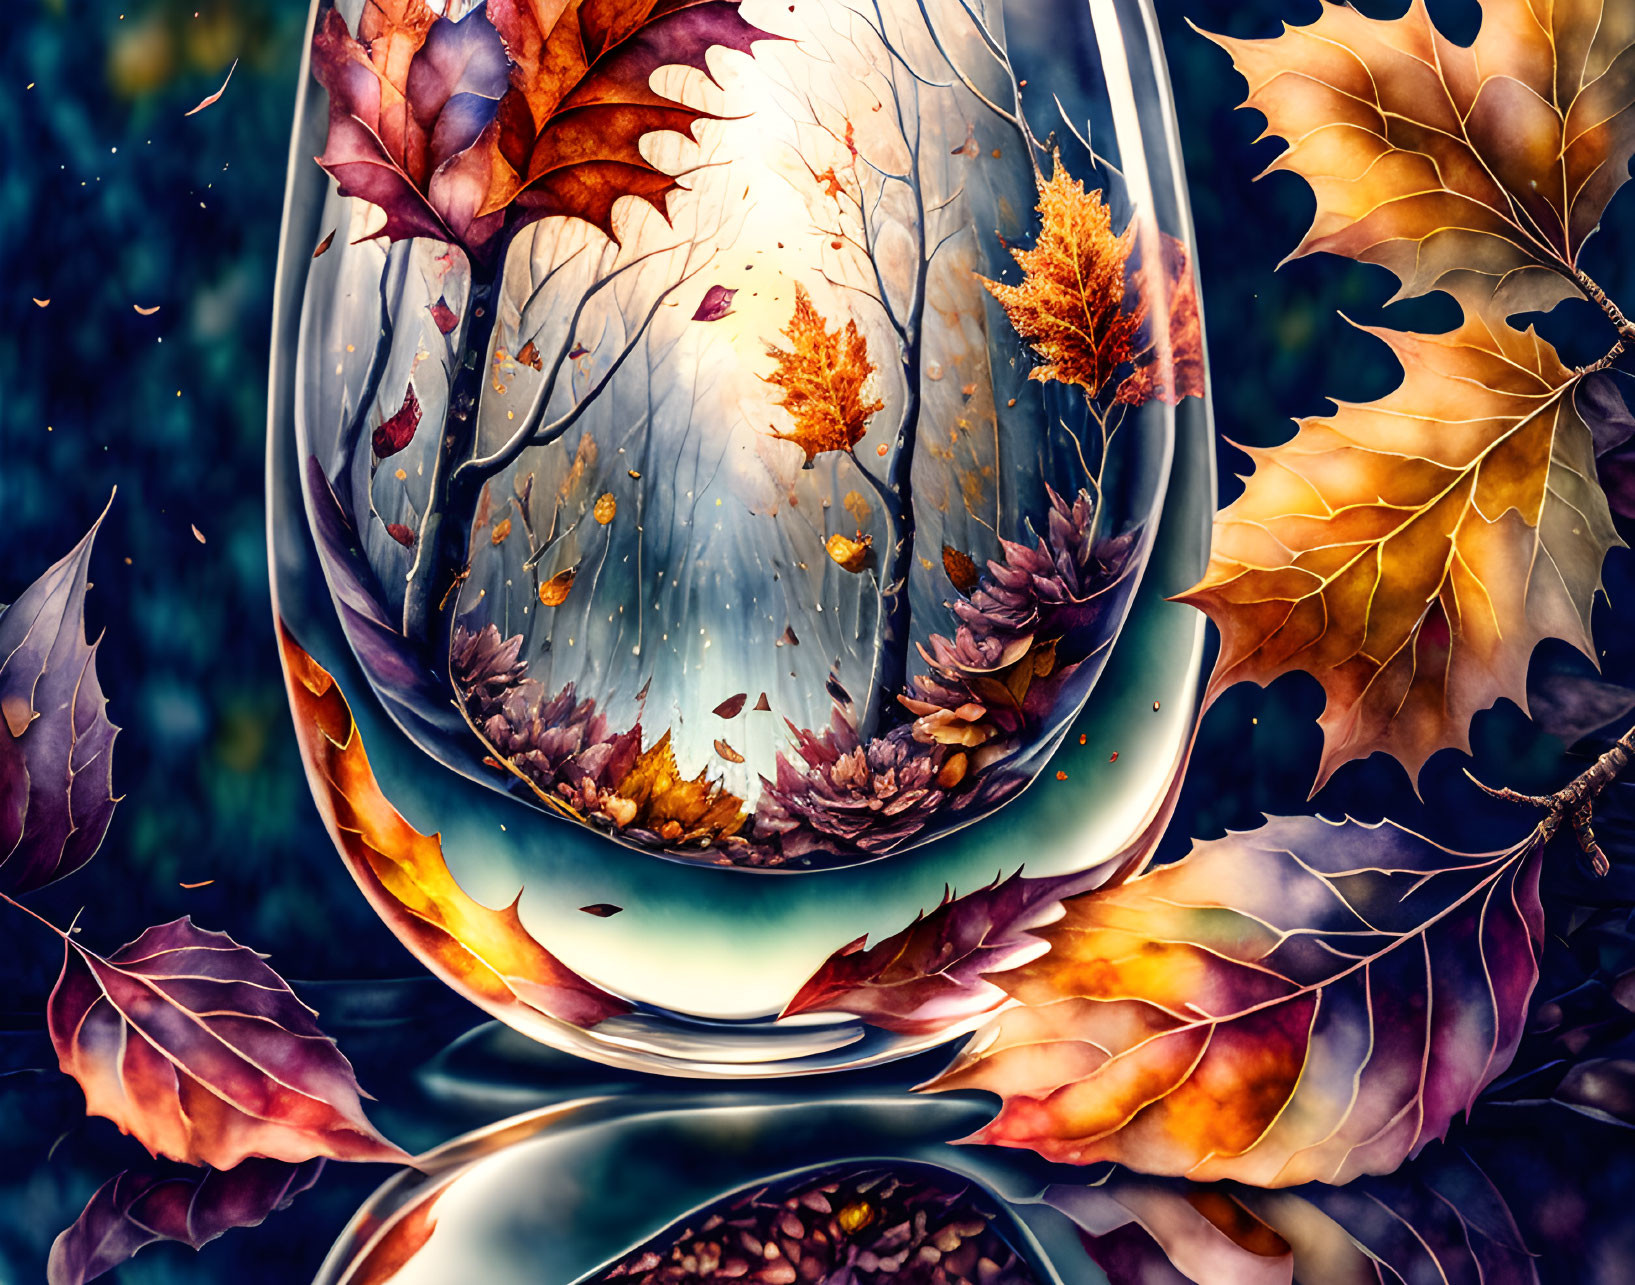  A glass reflecting the Autumn